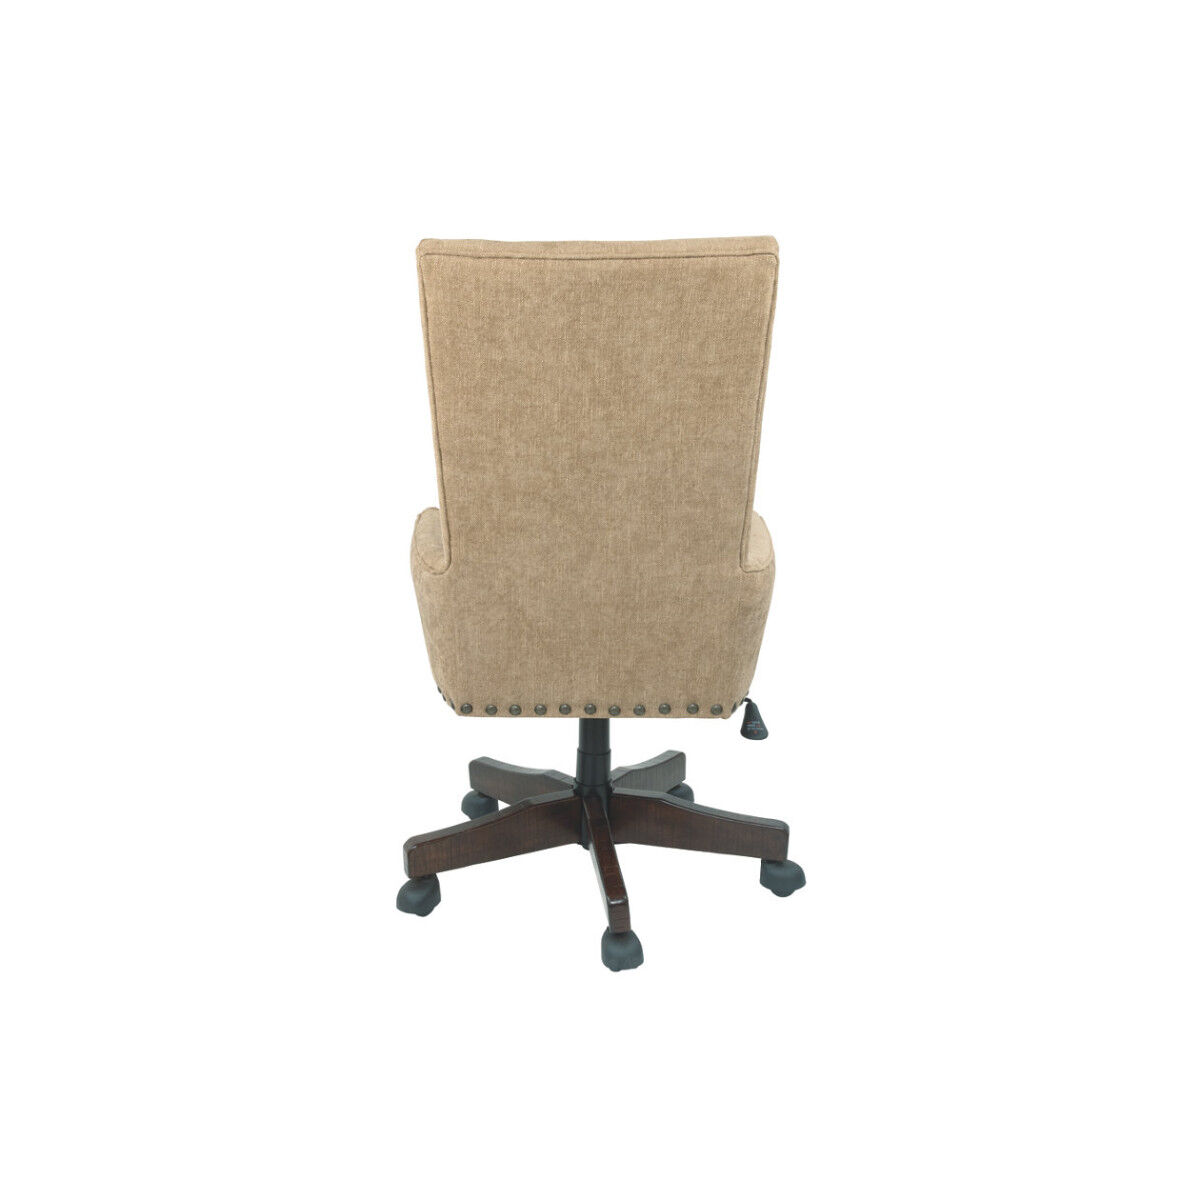 High Back Polyester Upholstered Wooden Swivel Chair with Adjustable Seat, Brown and Black